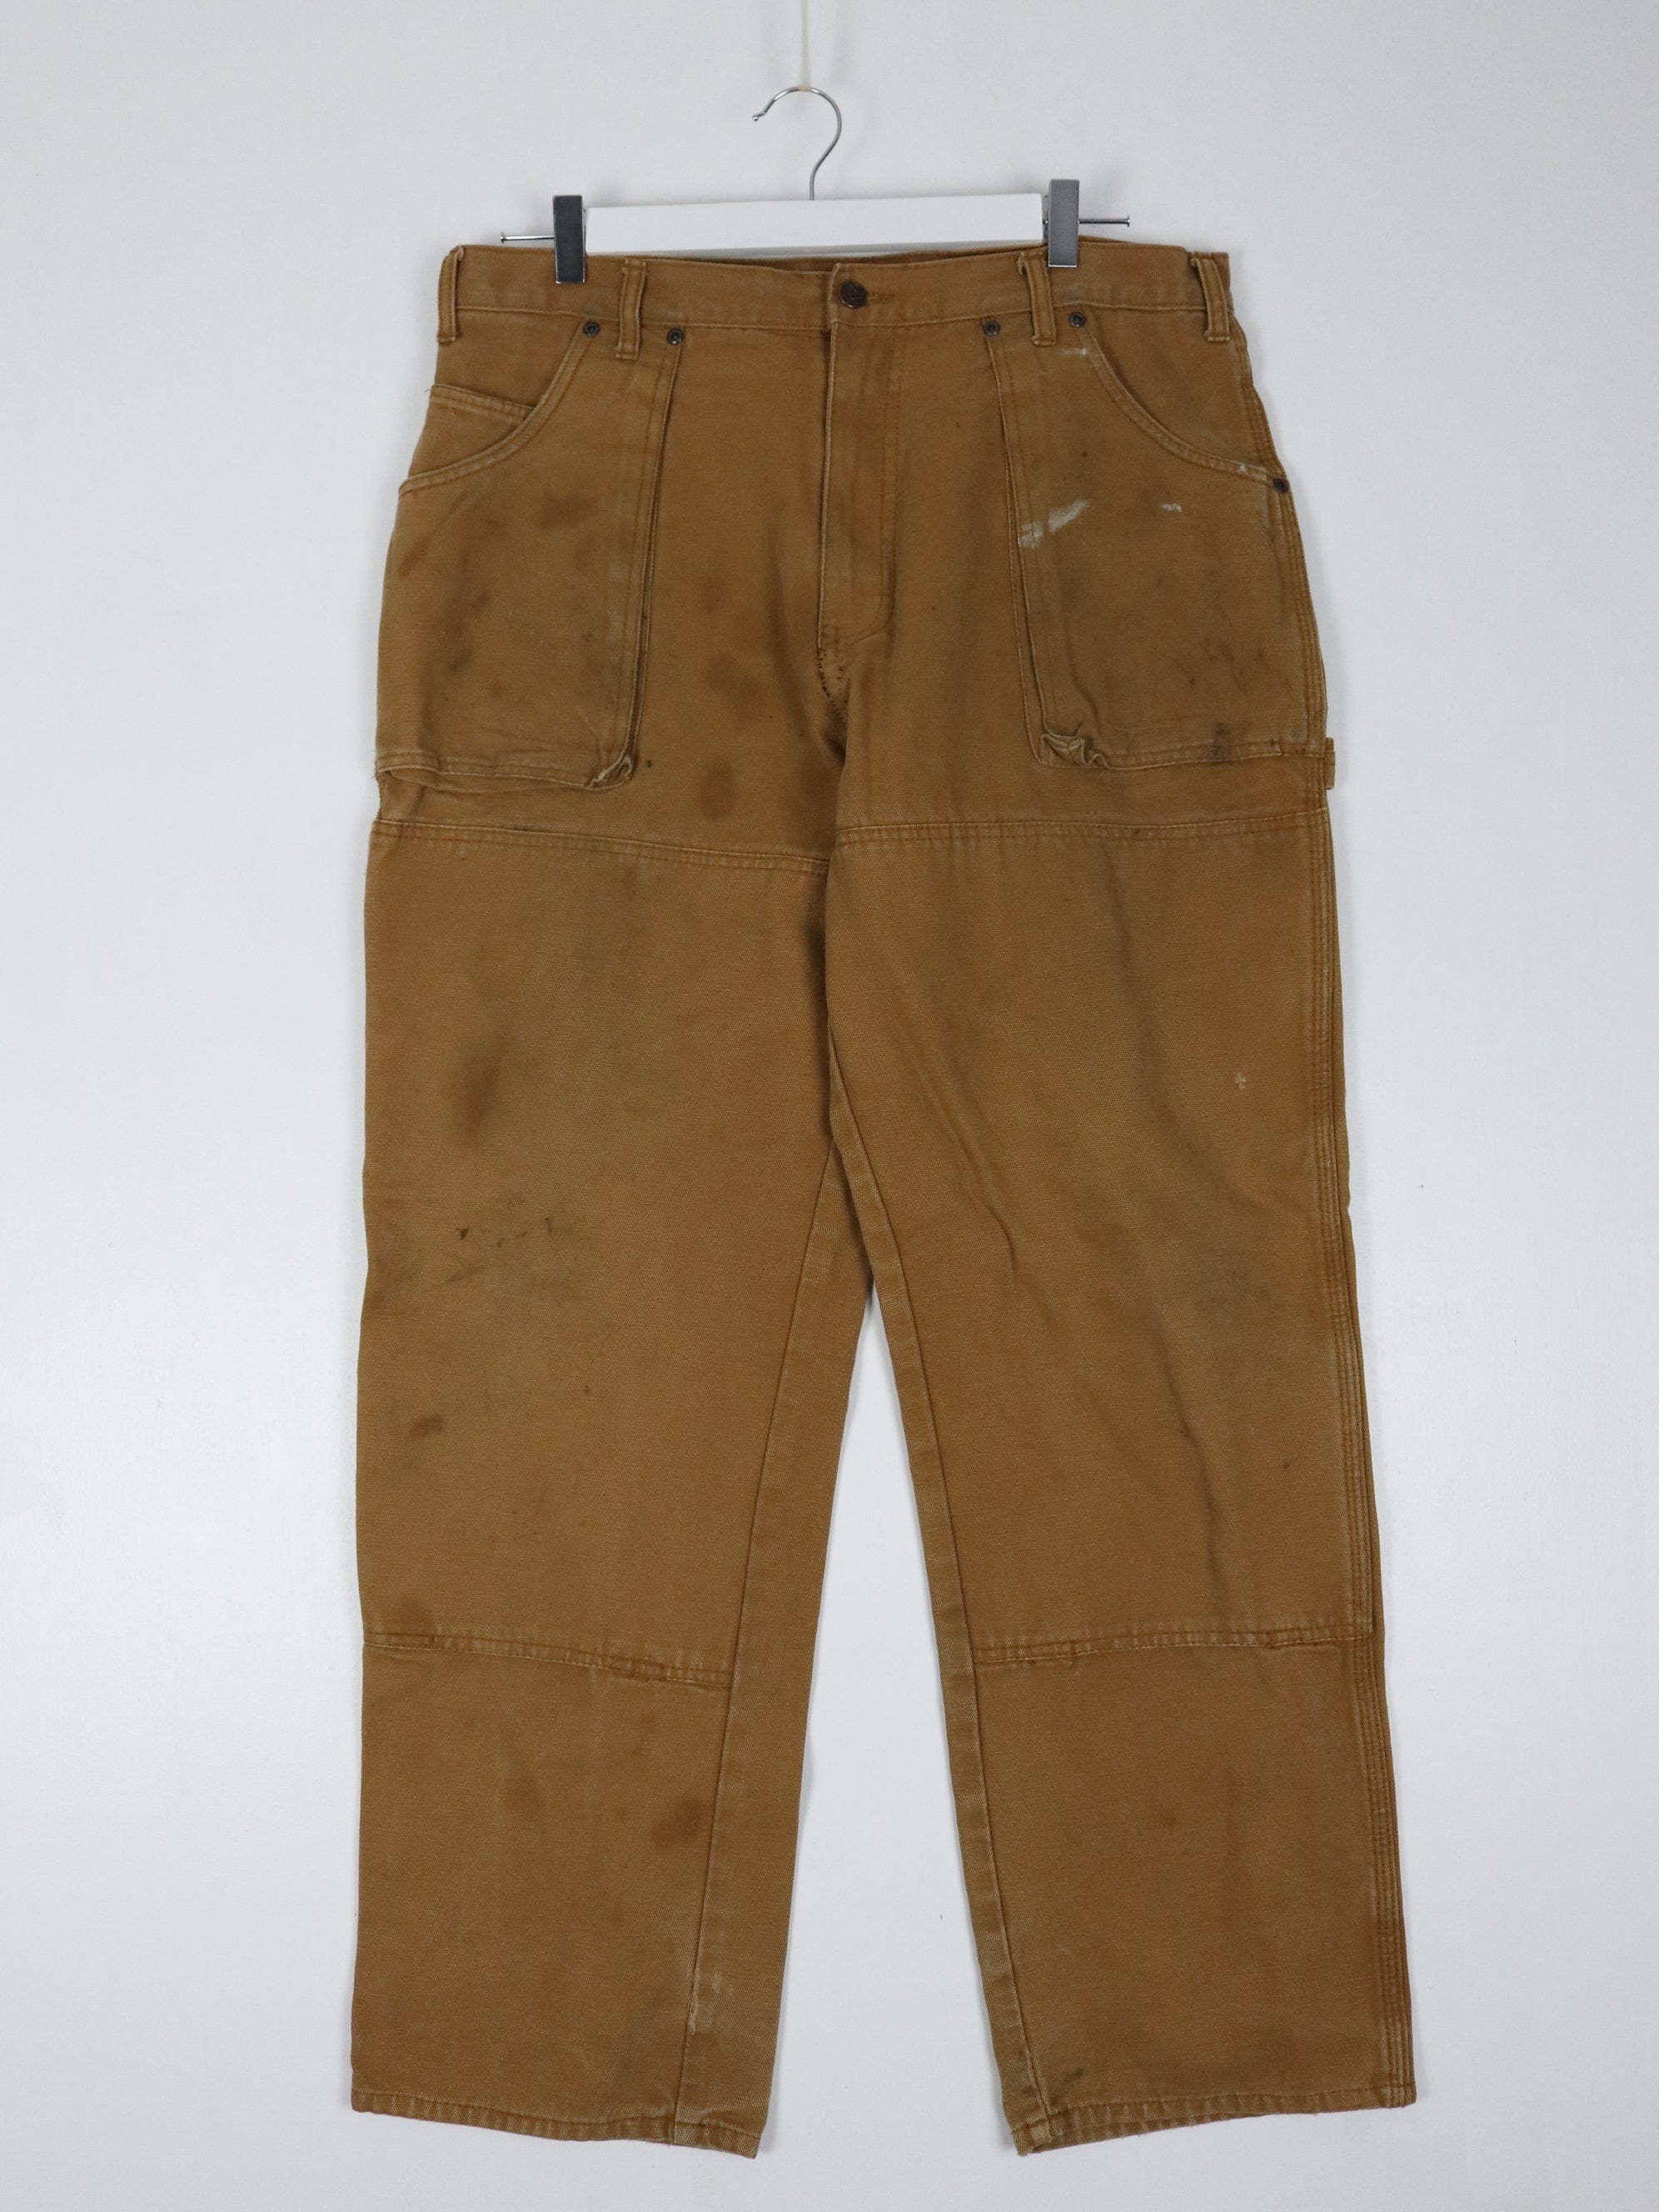 Carhartt double knee, cargo pants  Cool outfits, Aesthetic clothes, Retro  outfits